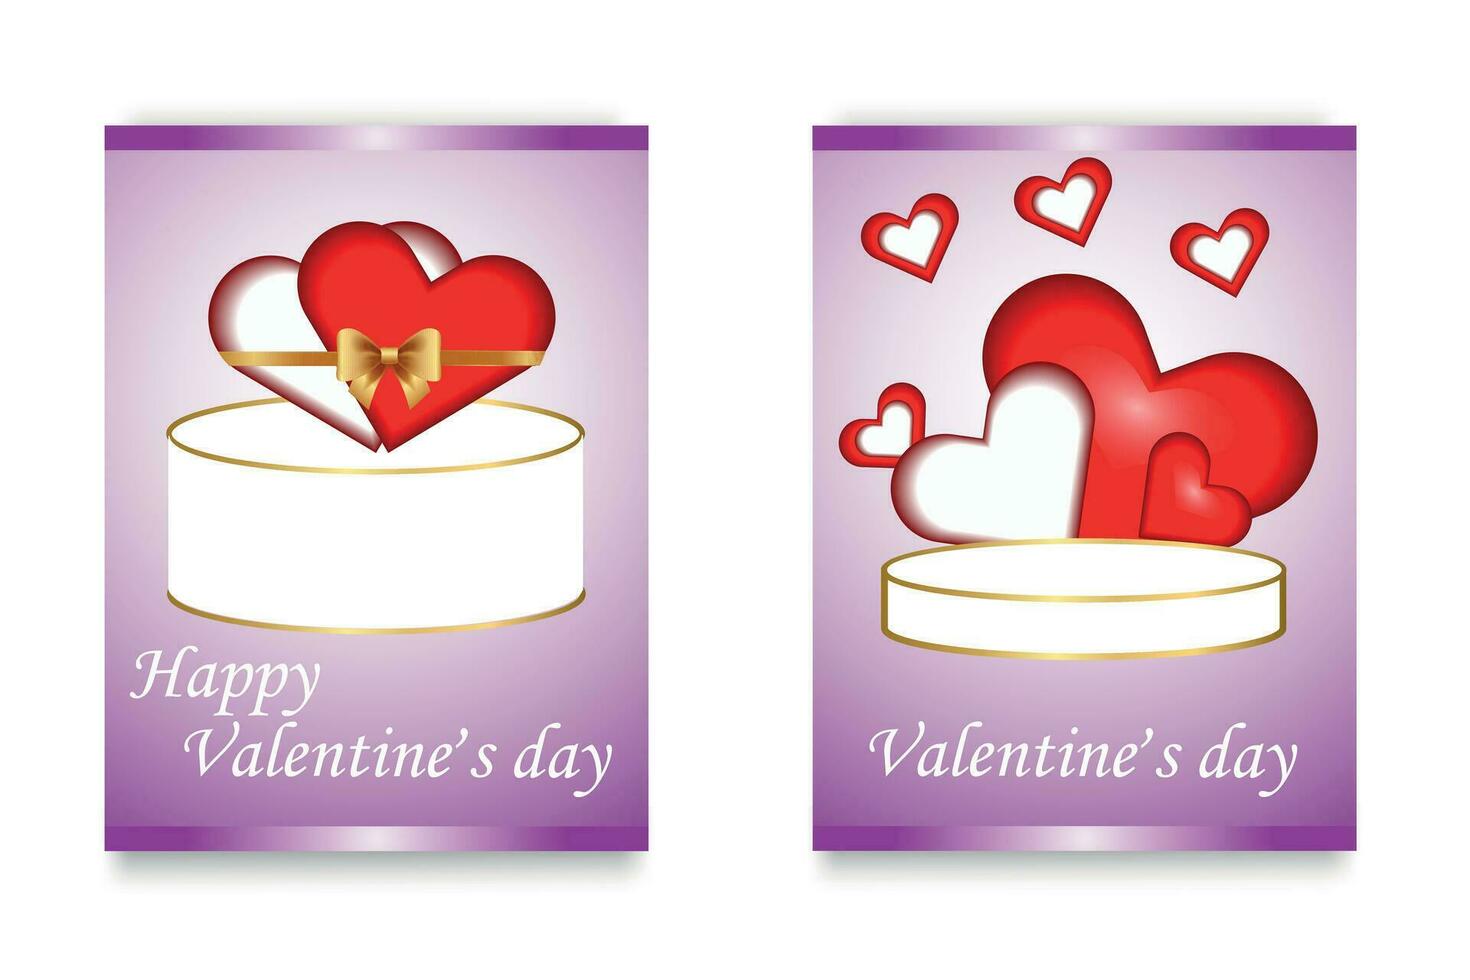 Valentines Day cards with hand drawn hearts design on cake box and podium with gold. Greeting card design. Vector illustration.